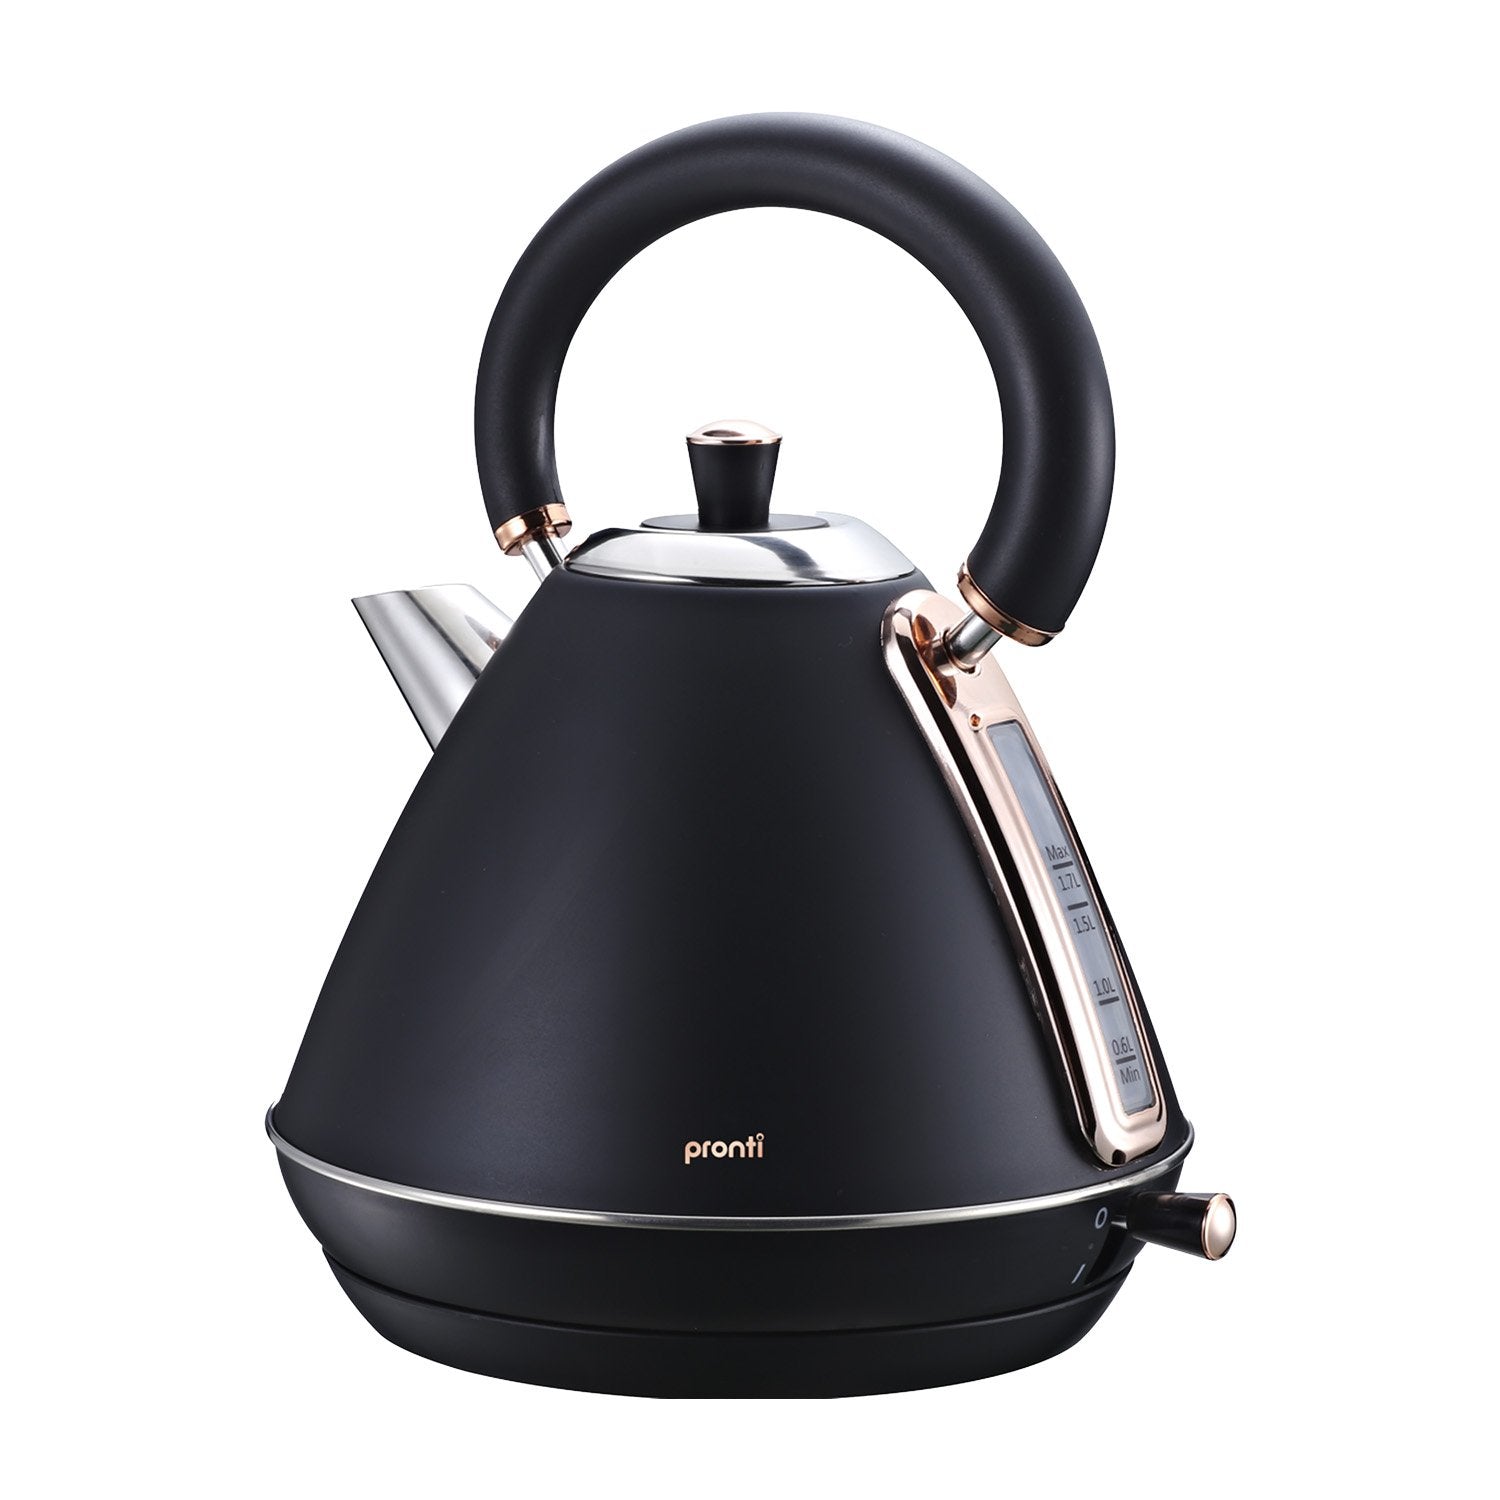 Pronti 1.7L Rose Trim Collection Kettle - Black - SILBERSHELL